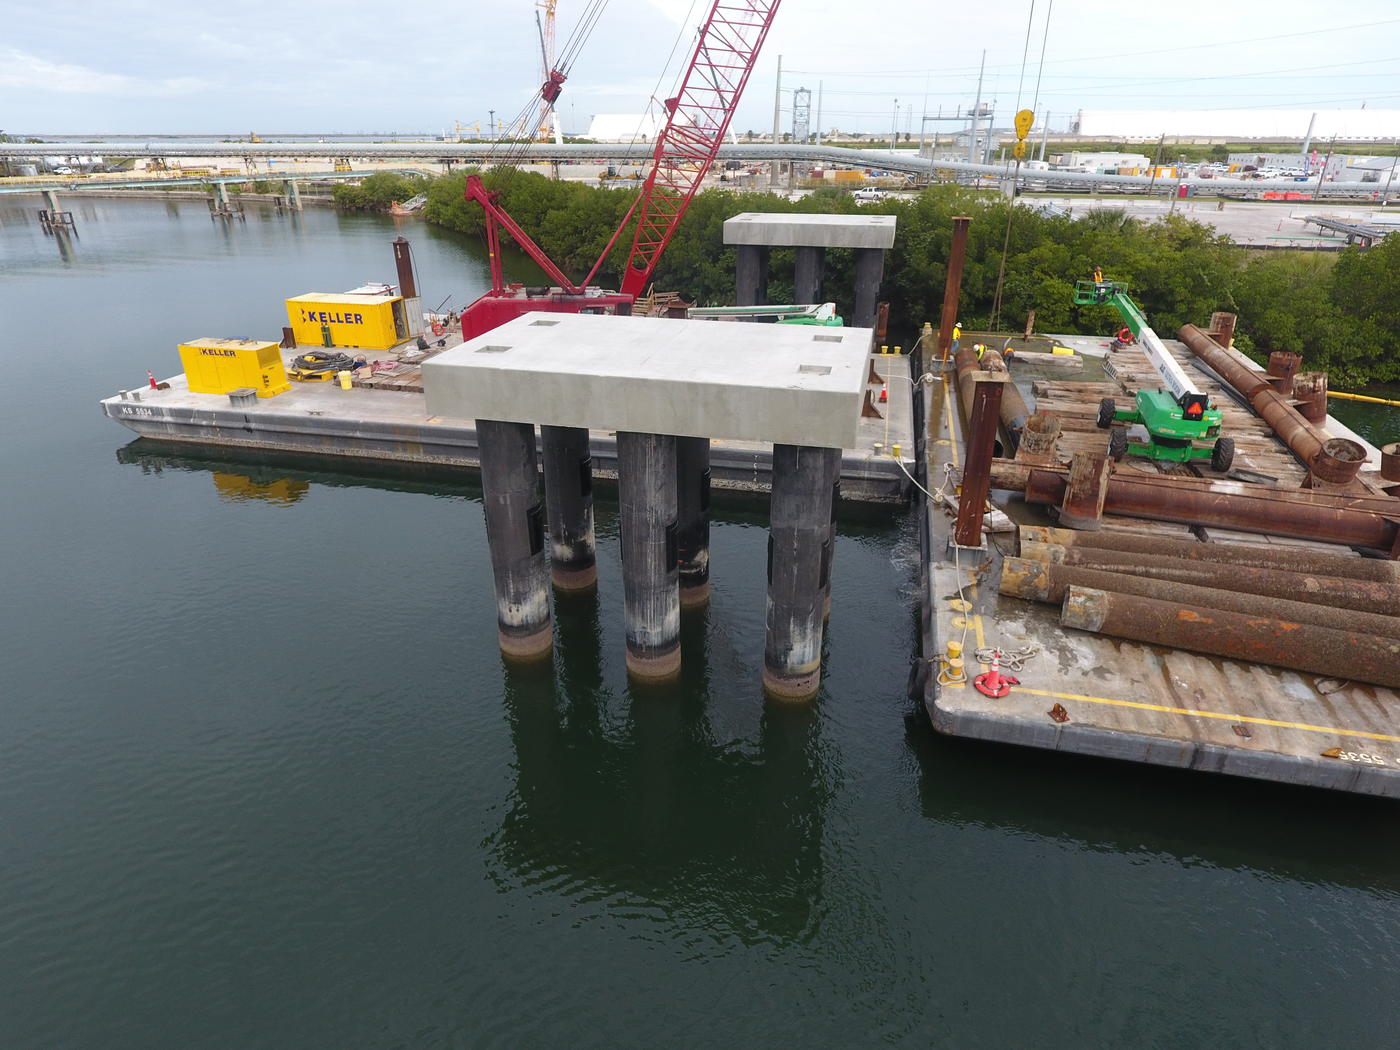 Moretrench site on power plant project in Florida